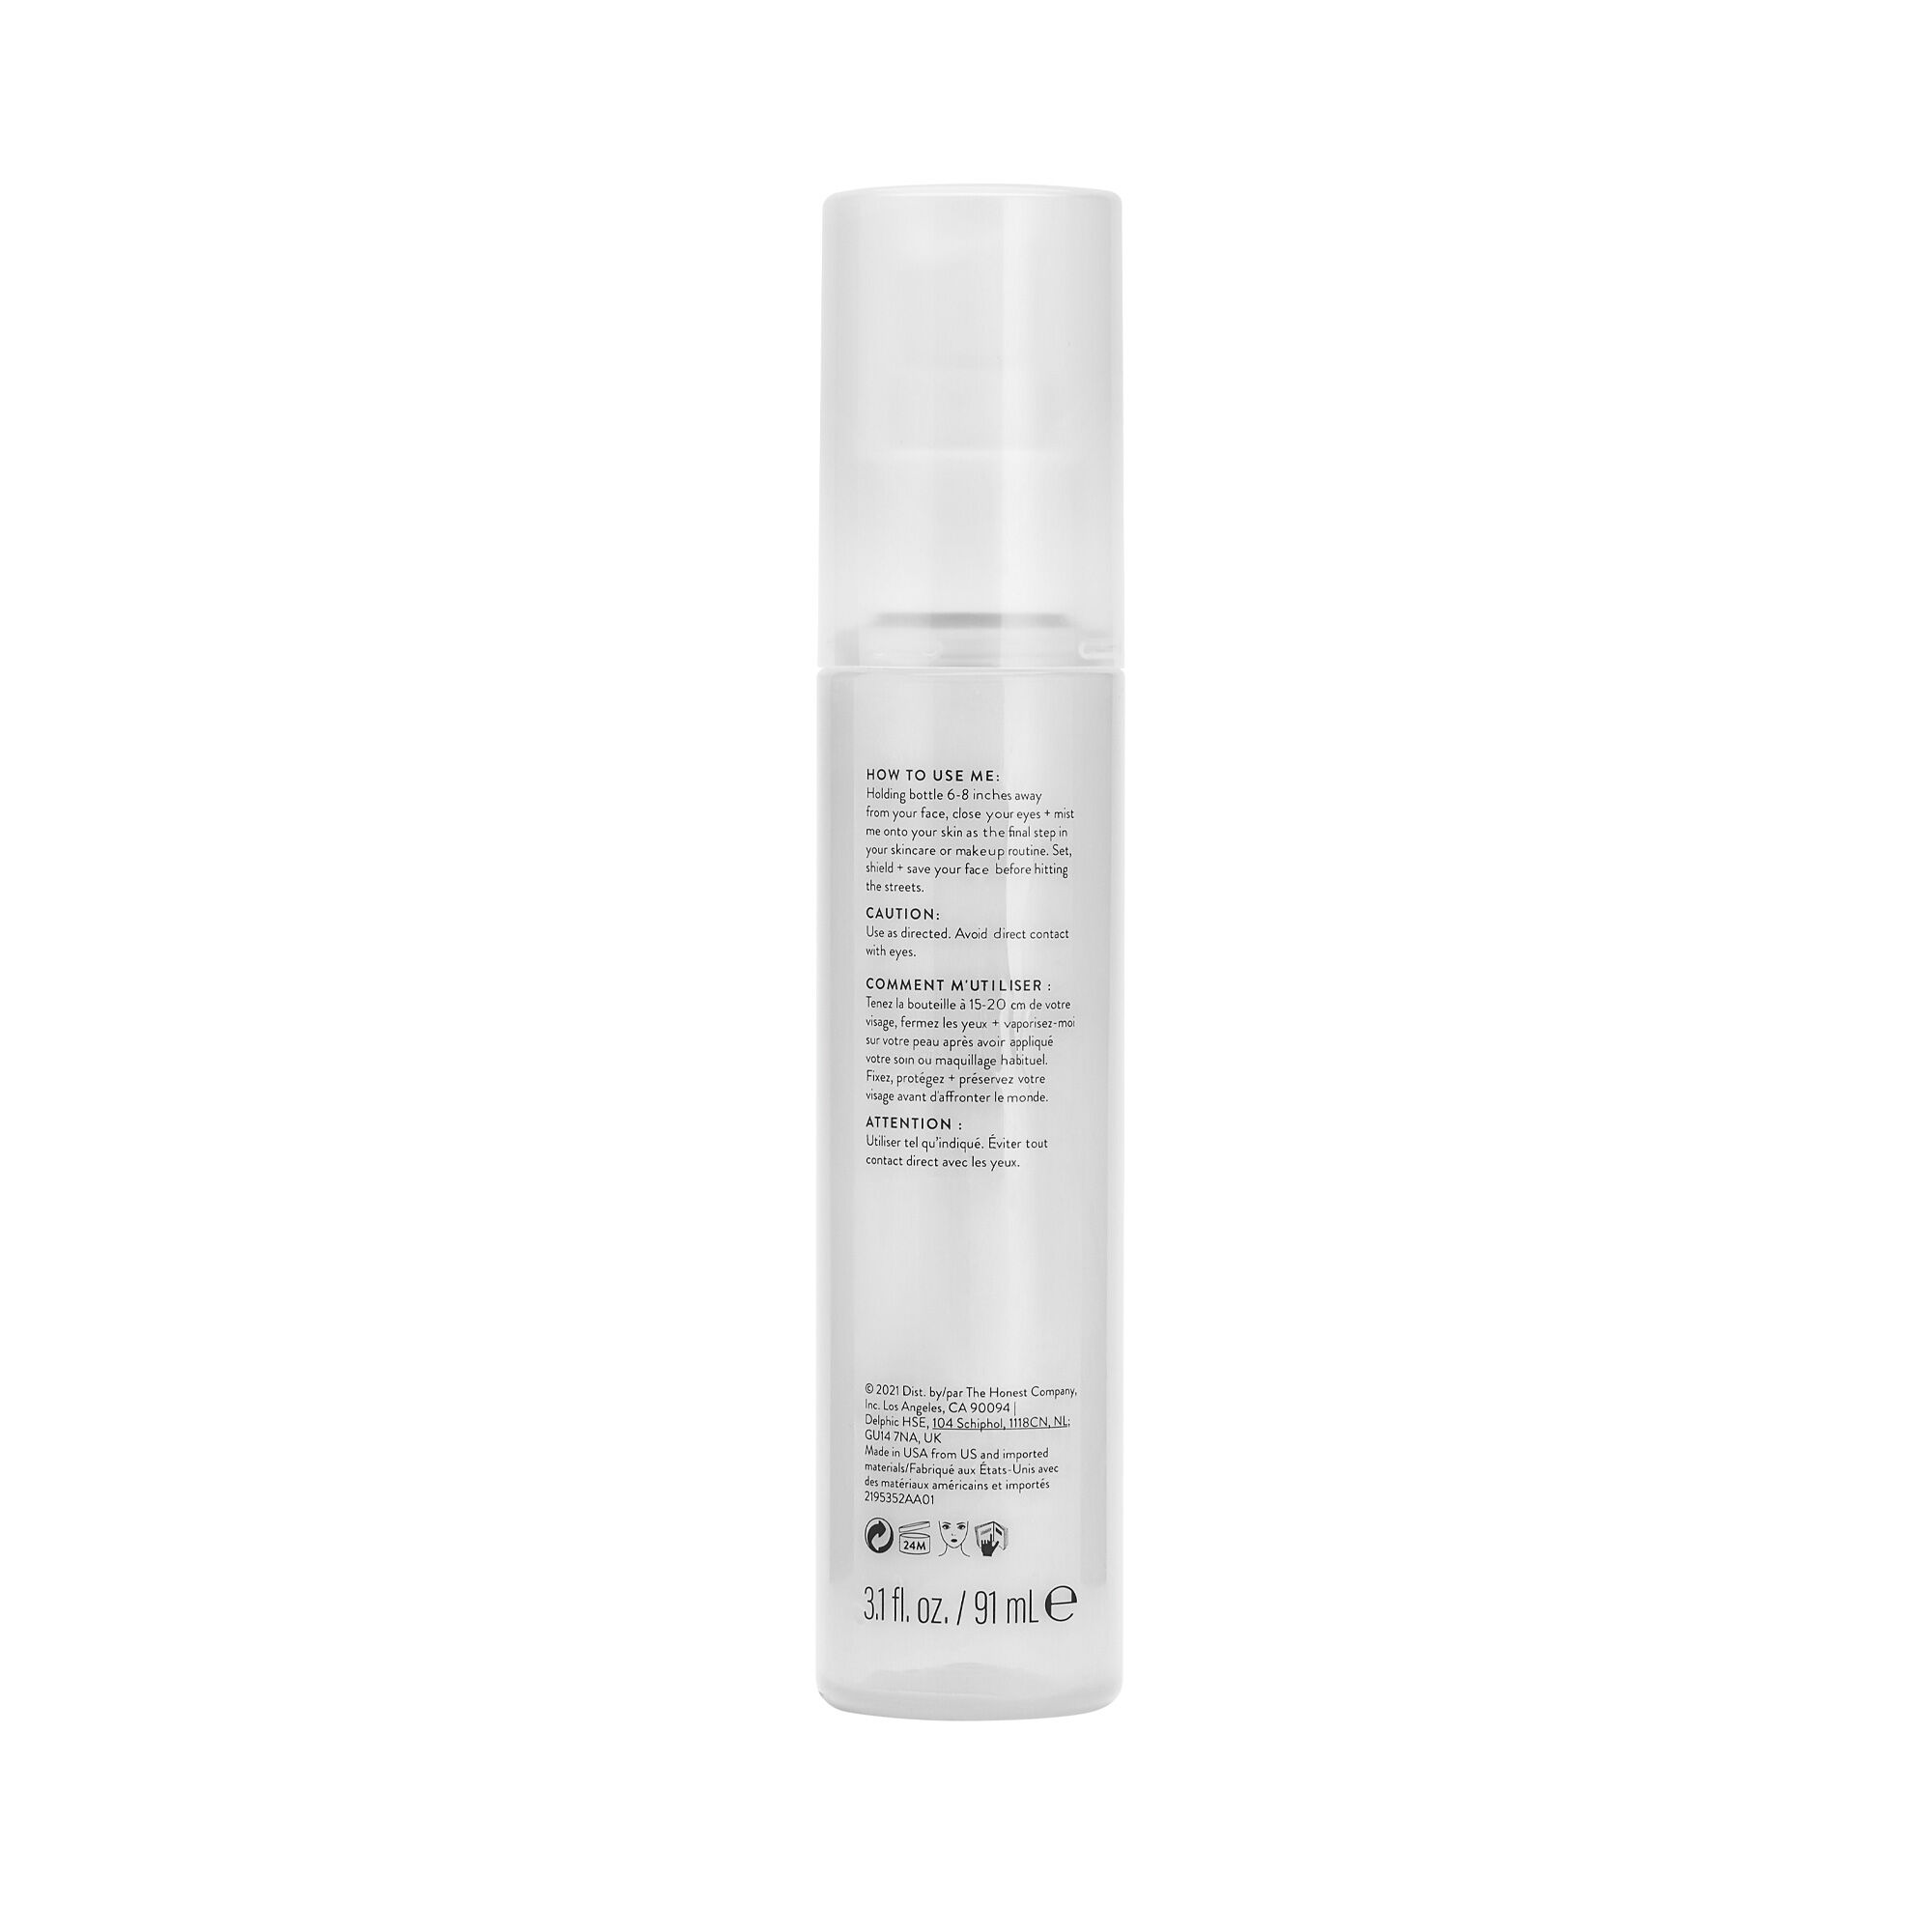 Save Face Shielding Setting Spray for Makeup